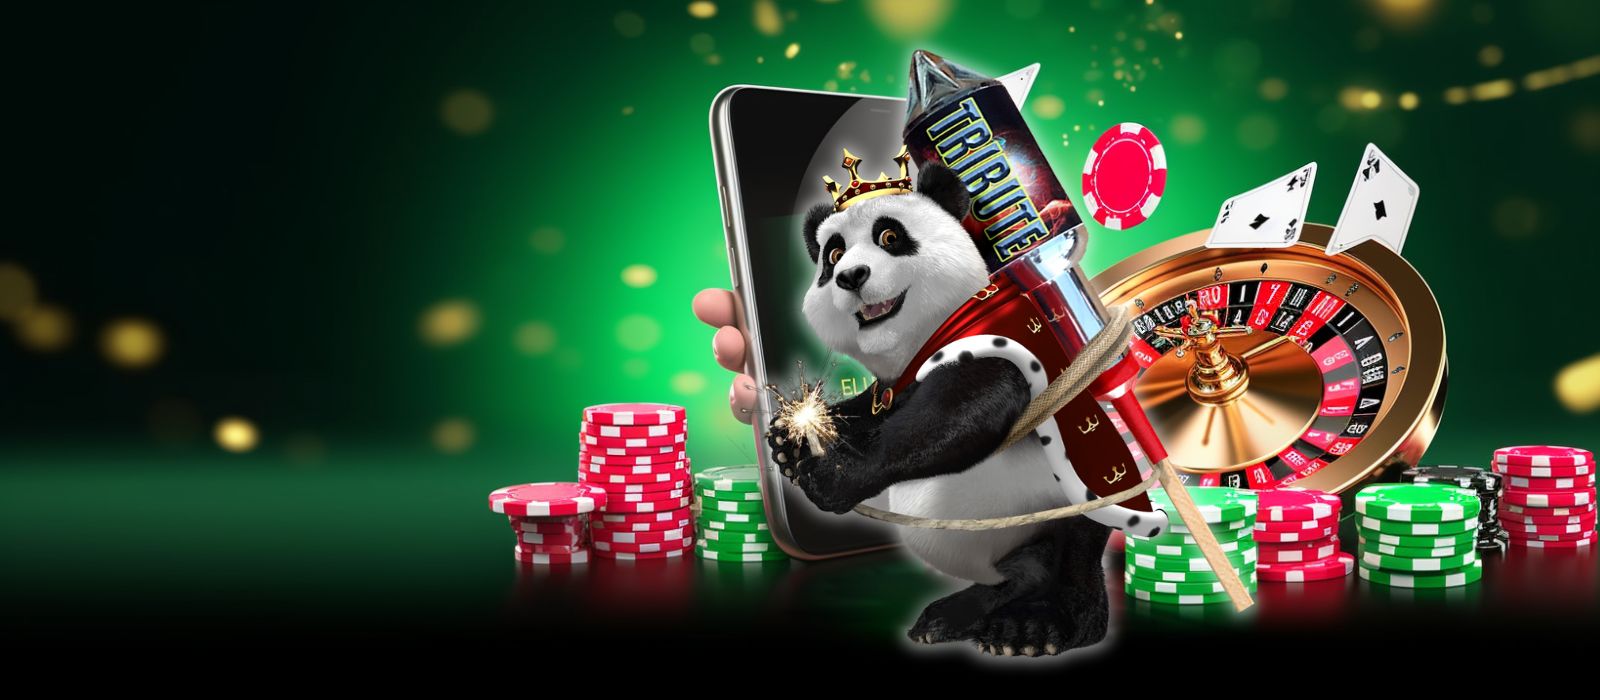 Royal Panda provides frequent promotional campaigns that can be worthwhile.